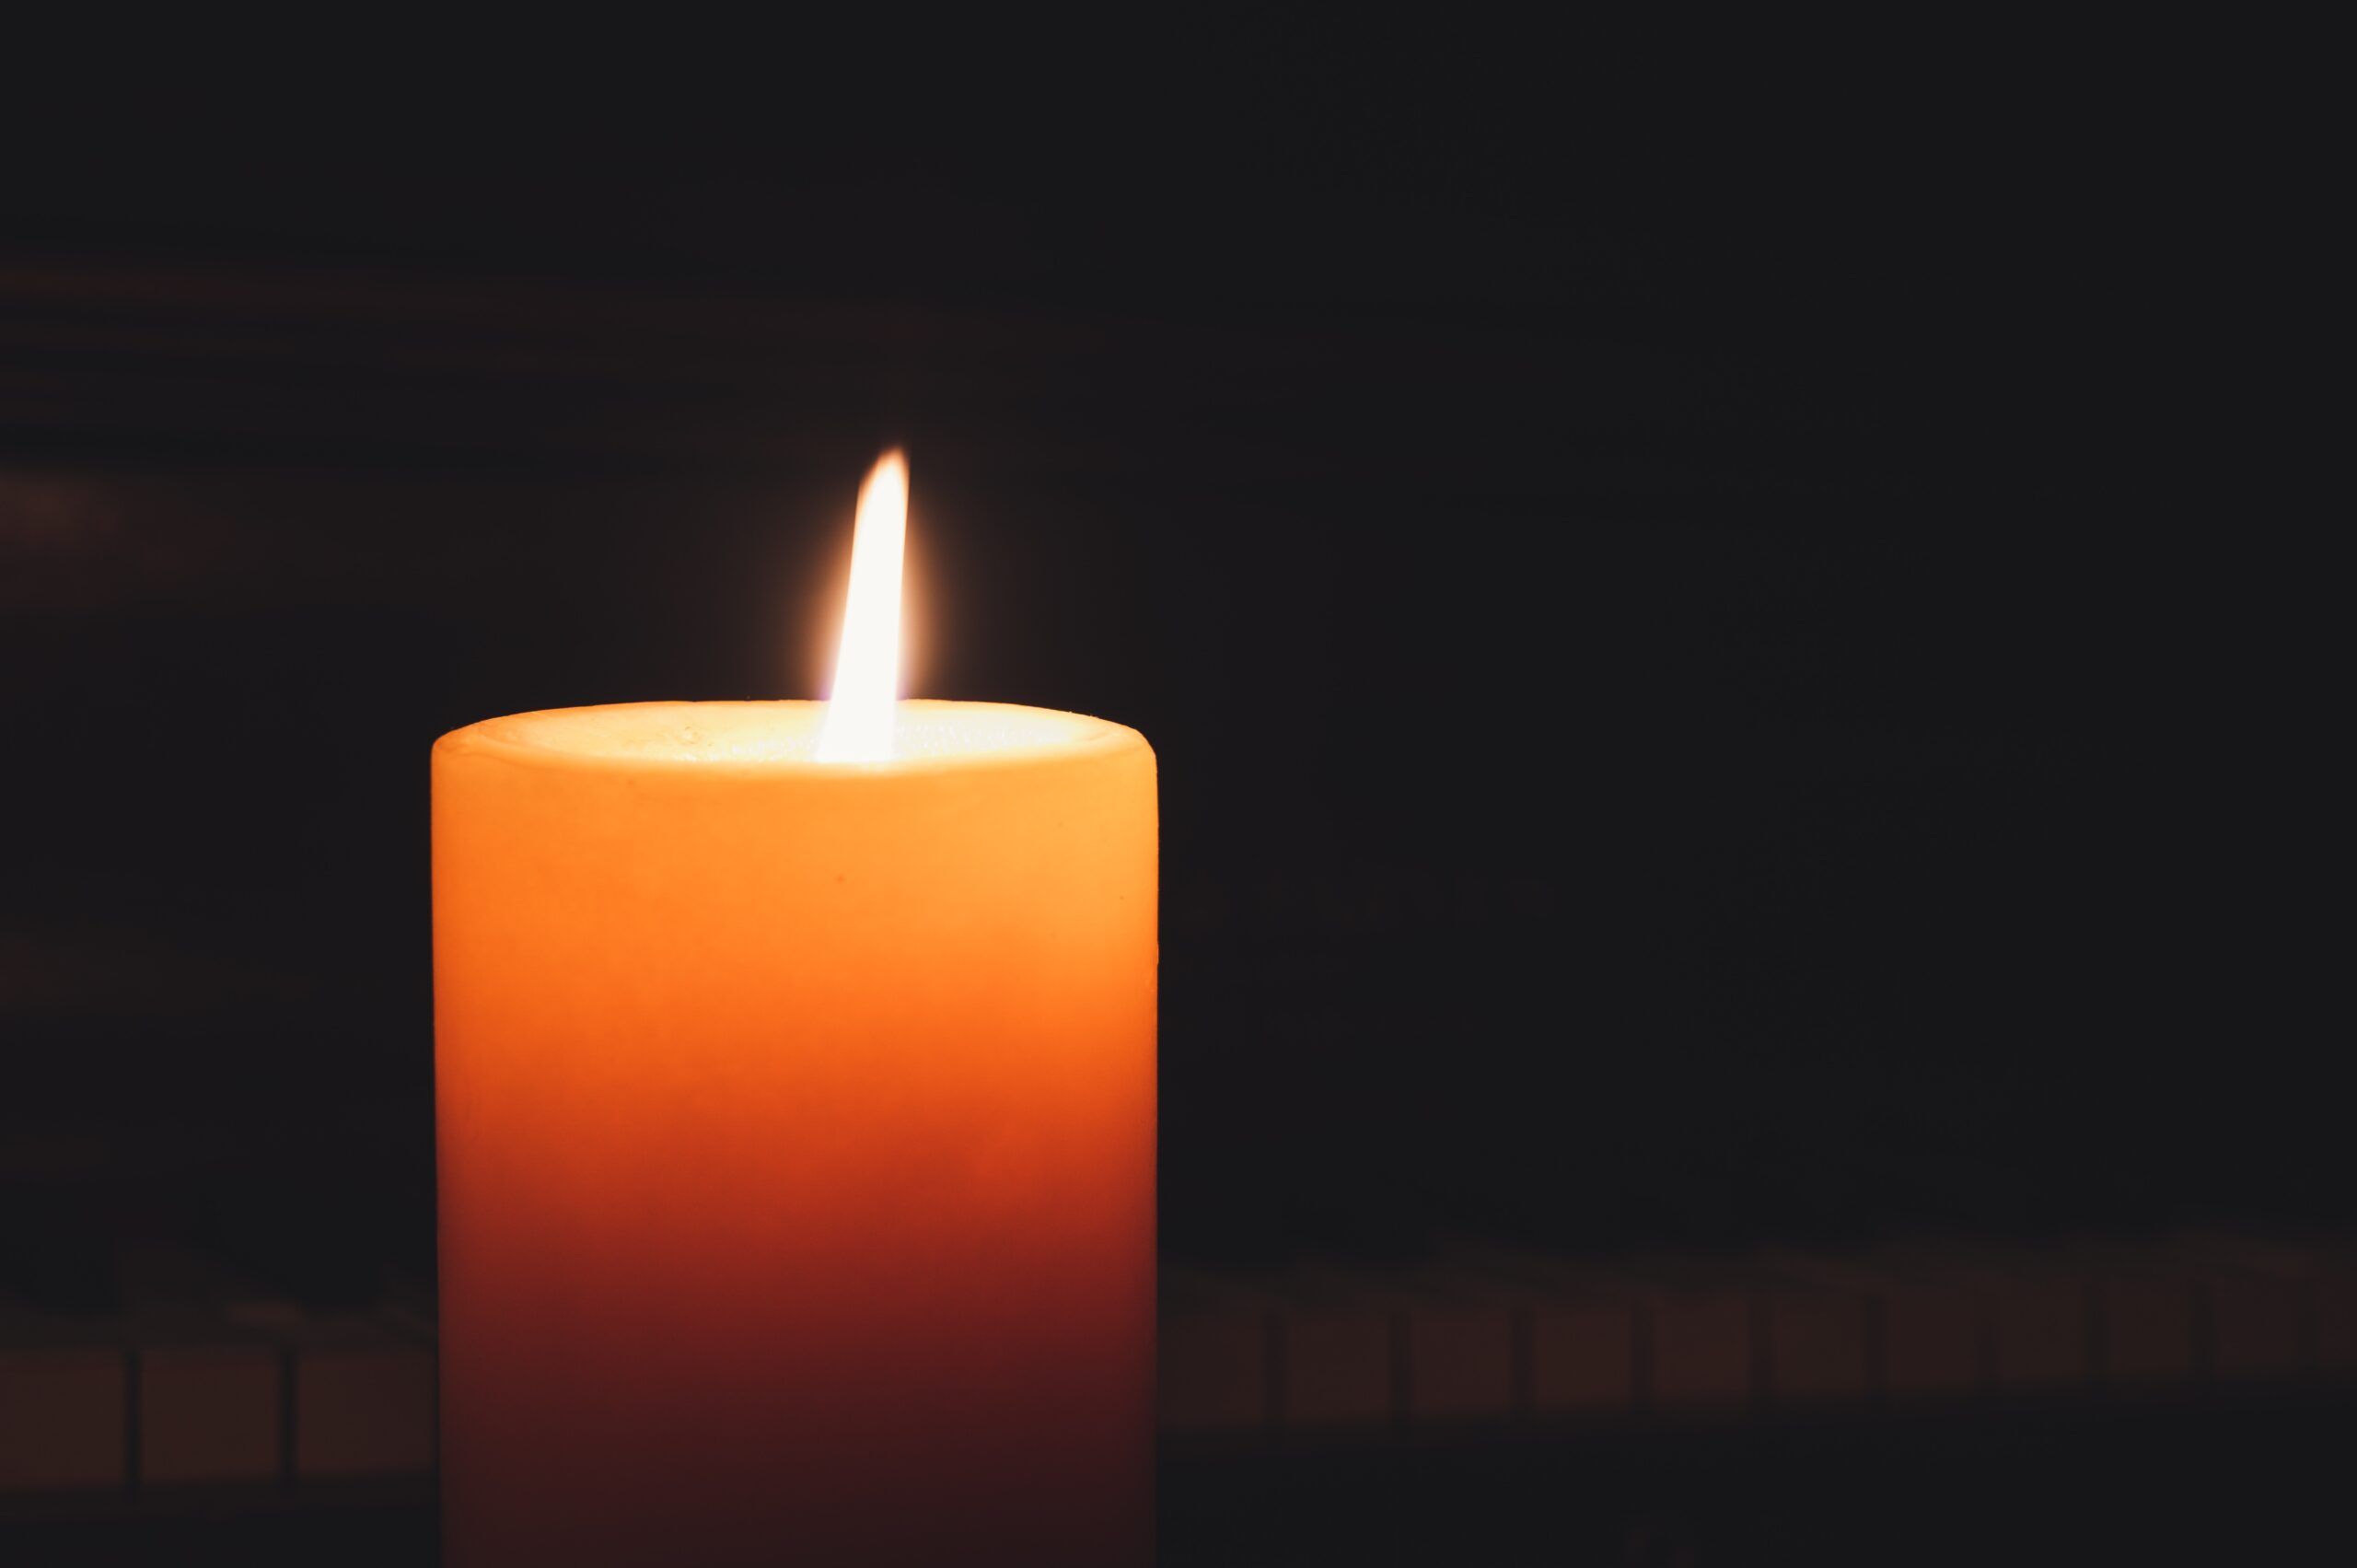 A lit white candle in darkness